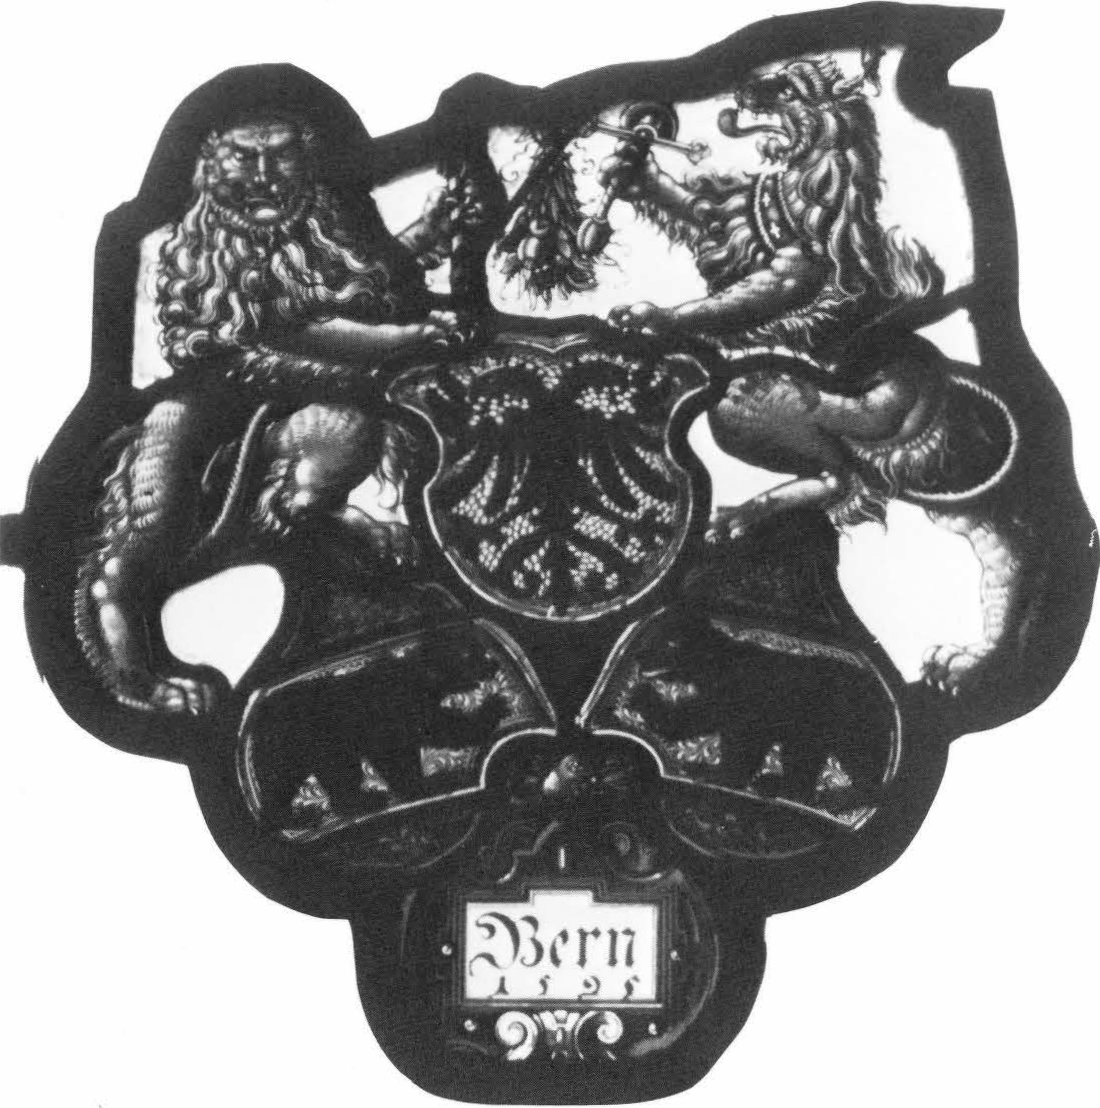 Heraldic Fragment with the Arms of the Holy Roman Empire and the Canton of Bern